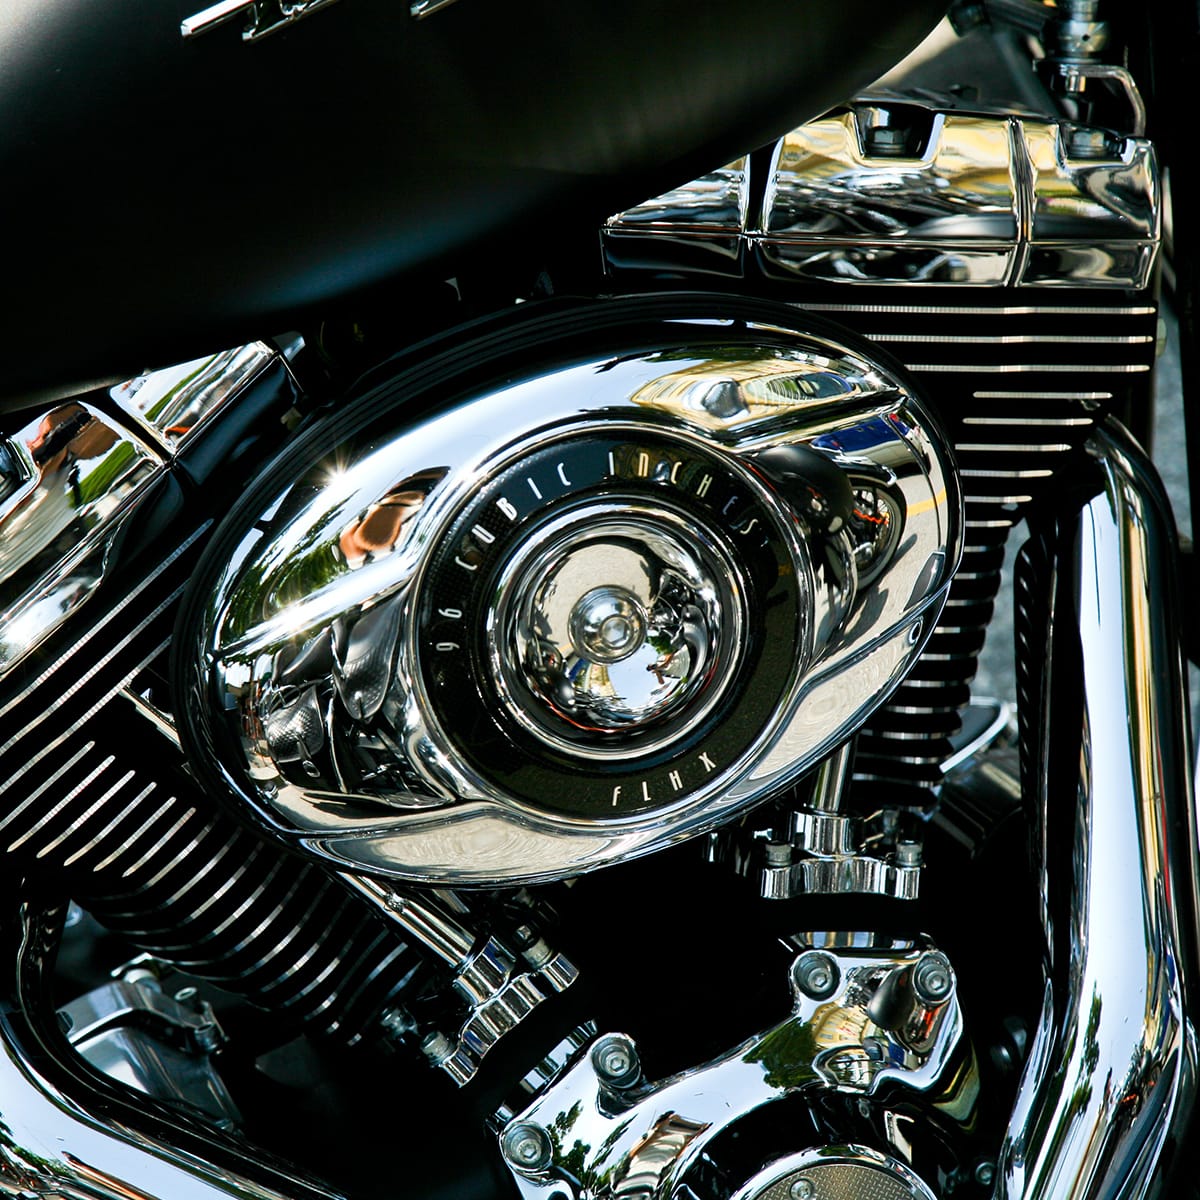 Classic and Vintage Motorcycle Parts Restoration in San Diego CA